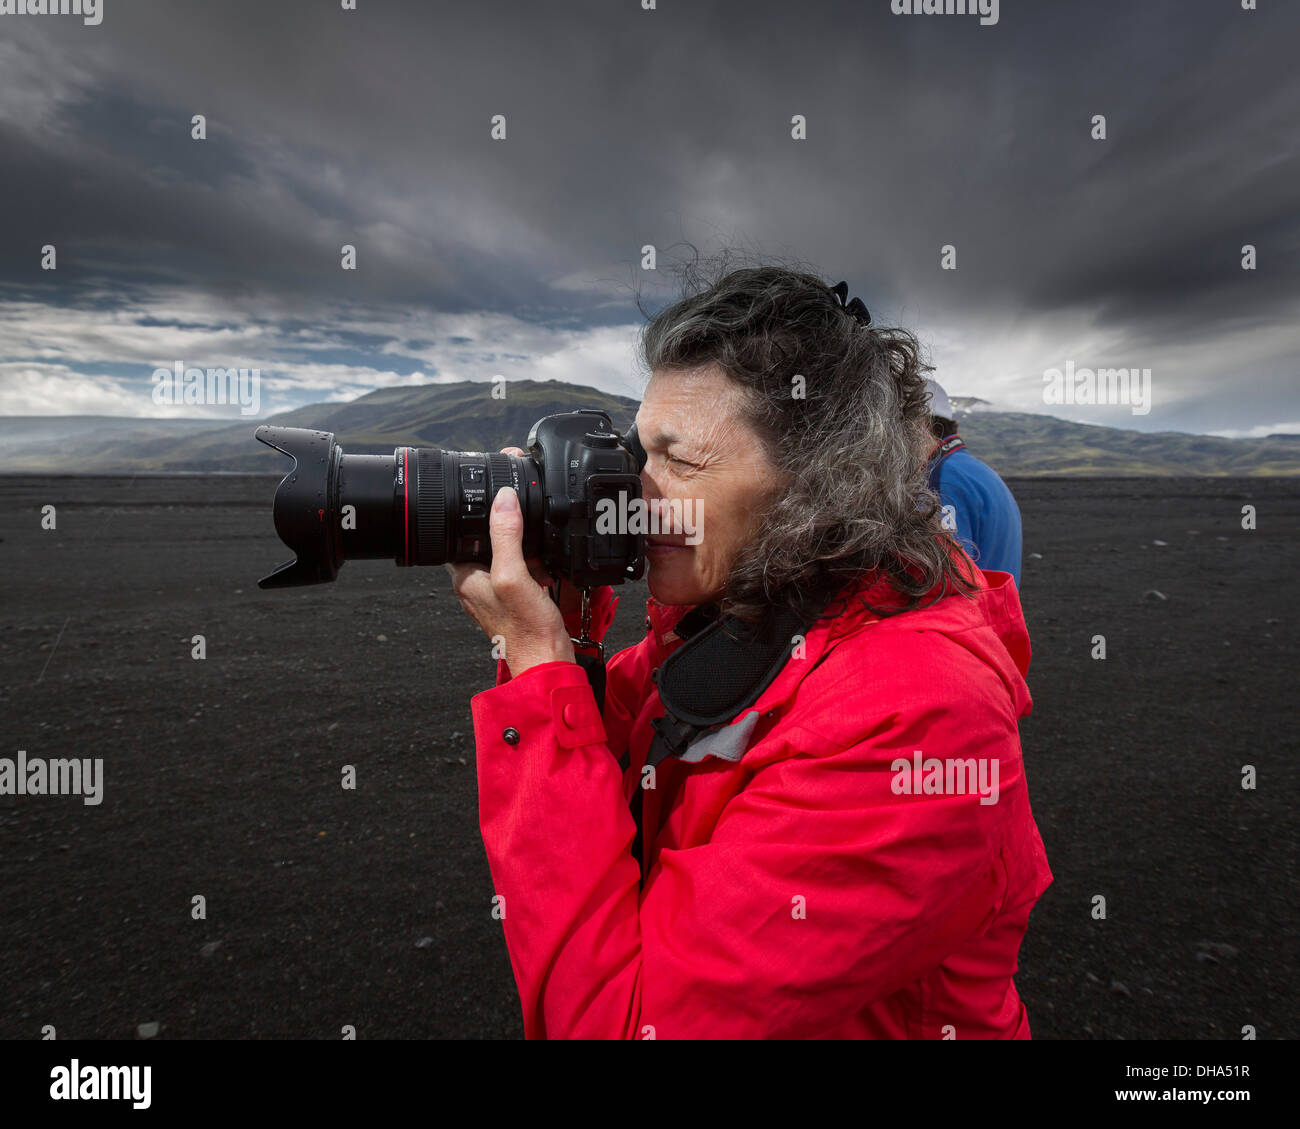 Woman takiing a picture using a DSLR camera, Thorsmork, Iceland Stock Photo